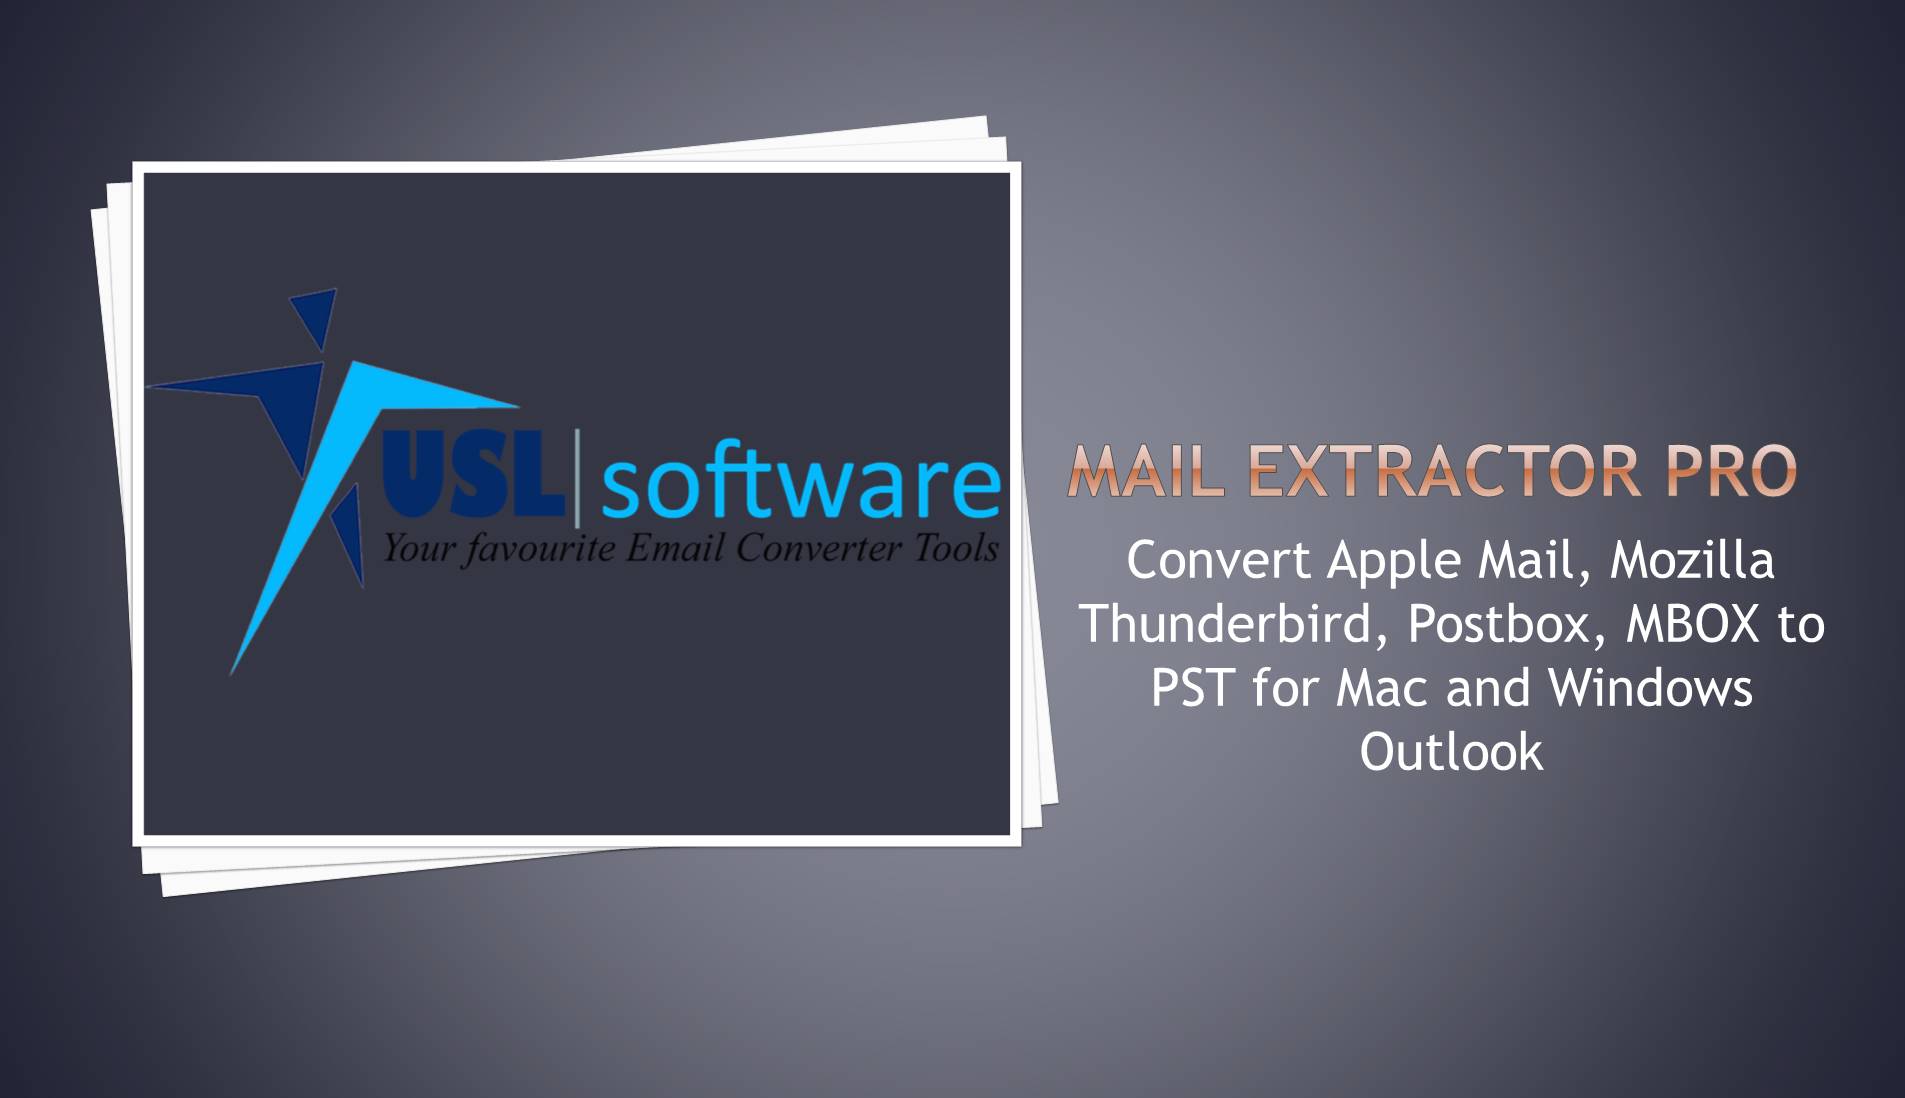 Mail Extractor Pro